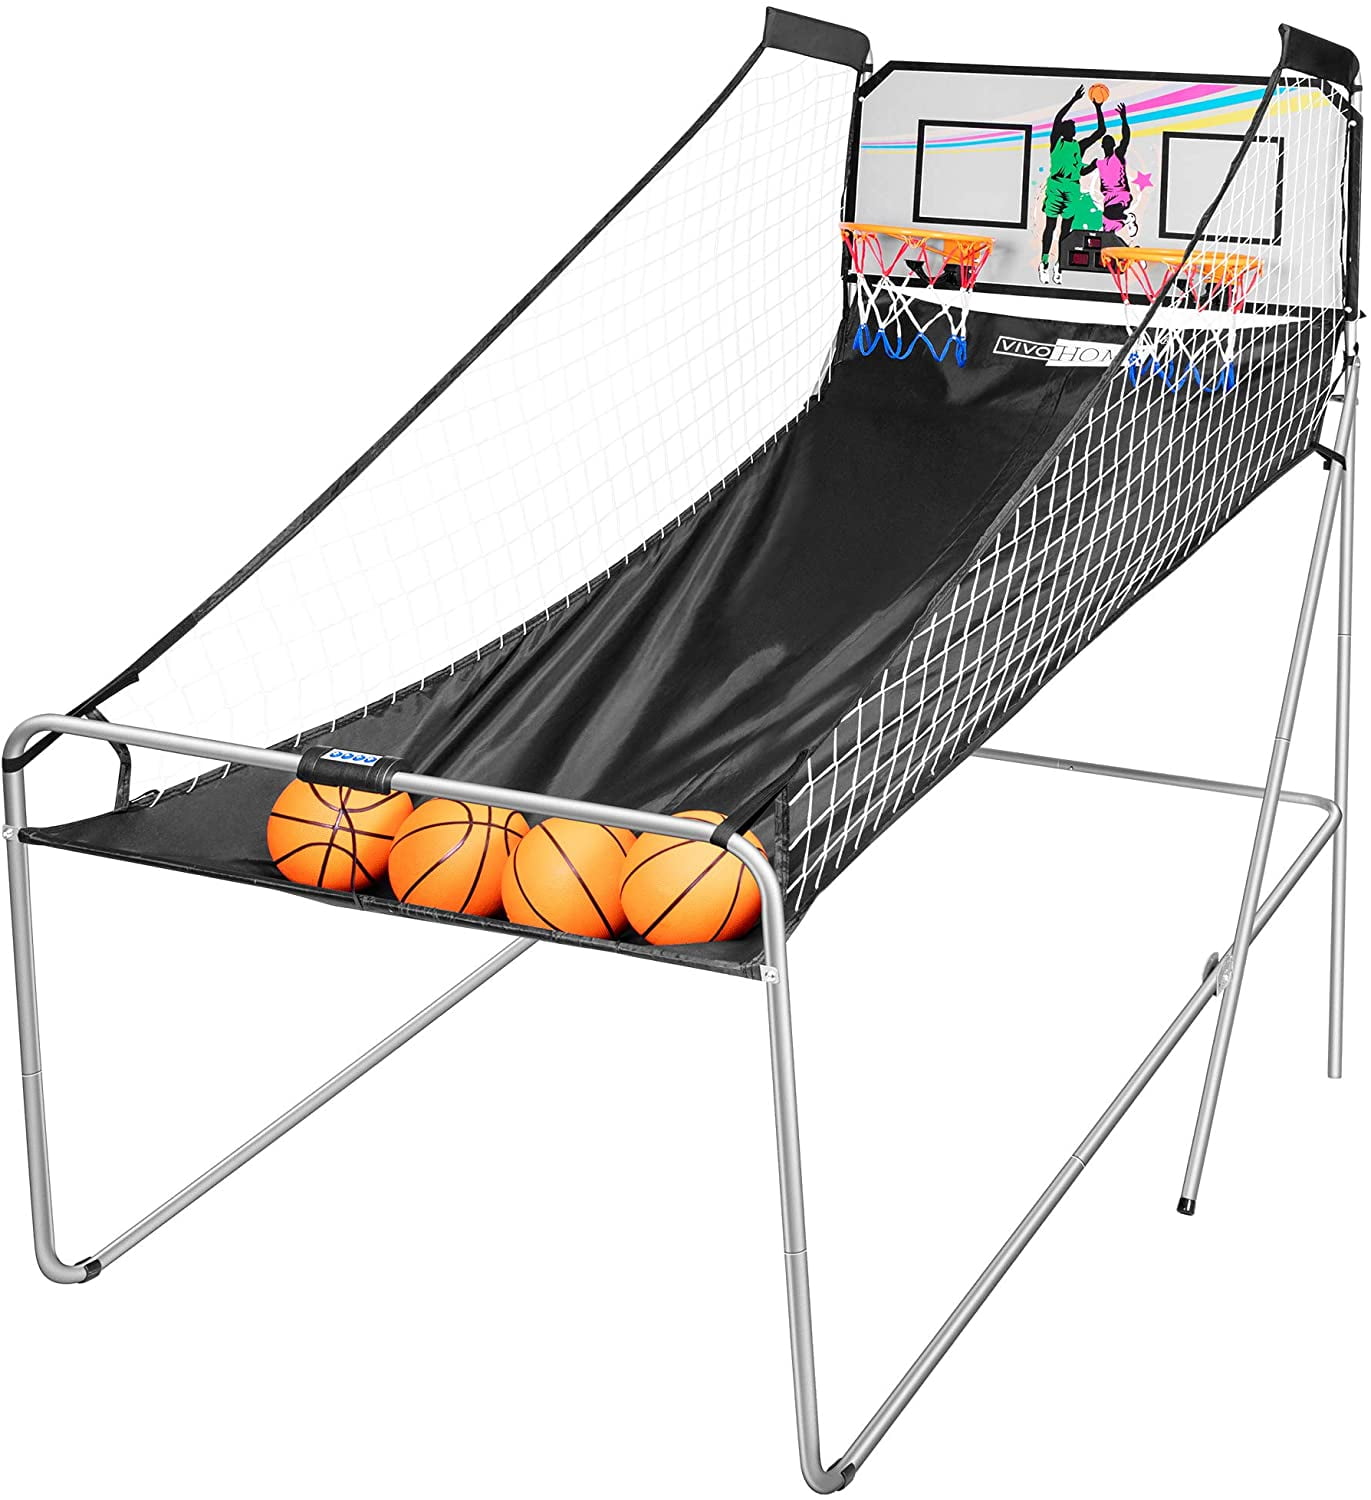 BestValue Go Foldable Double Arcade Electronic Basketball Game for 2 Players with LED Scoring System 